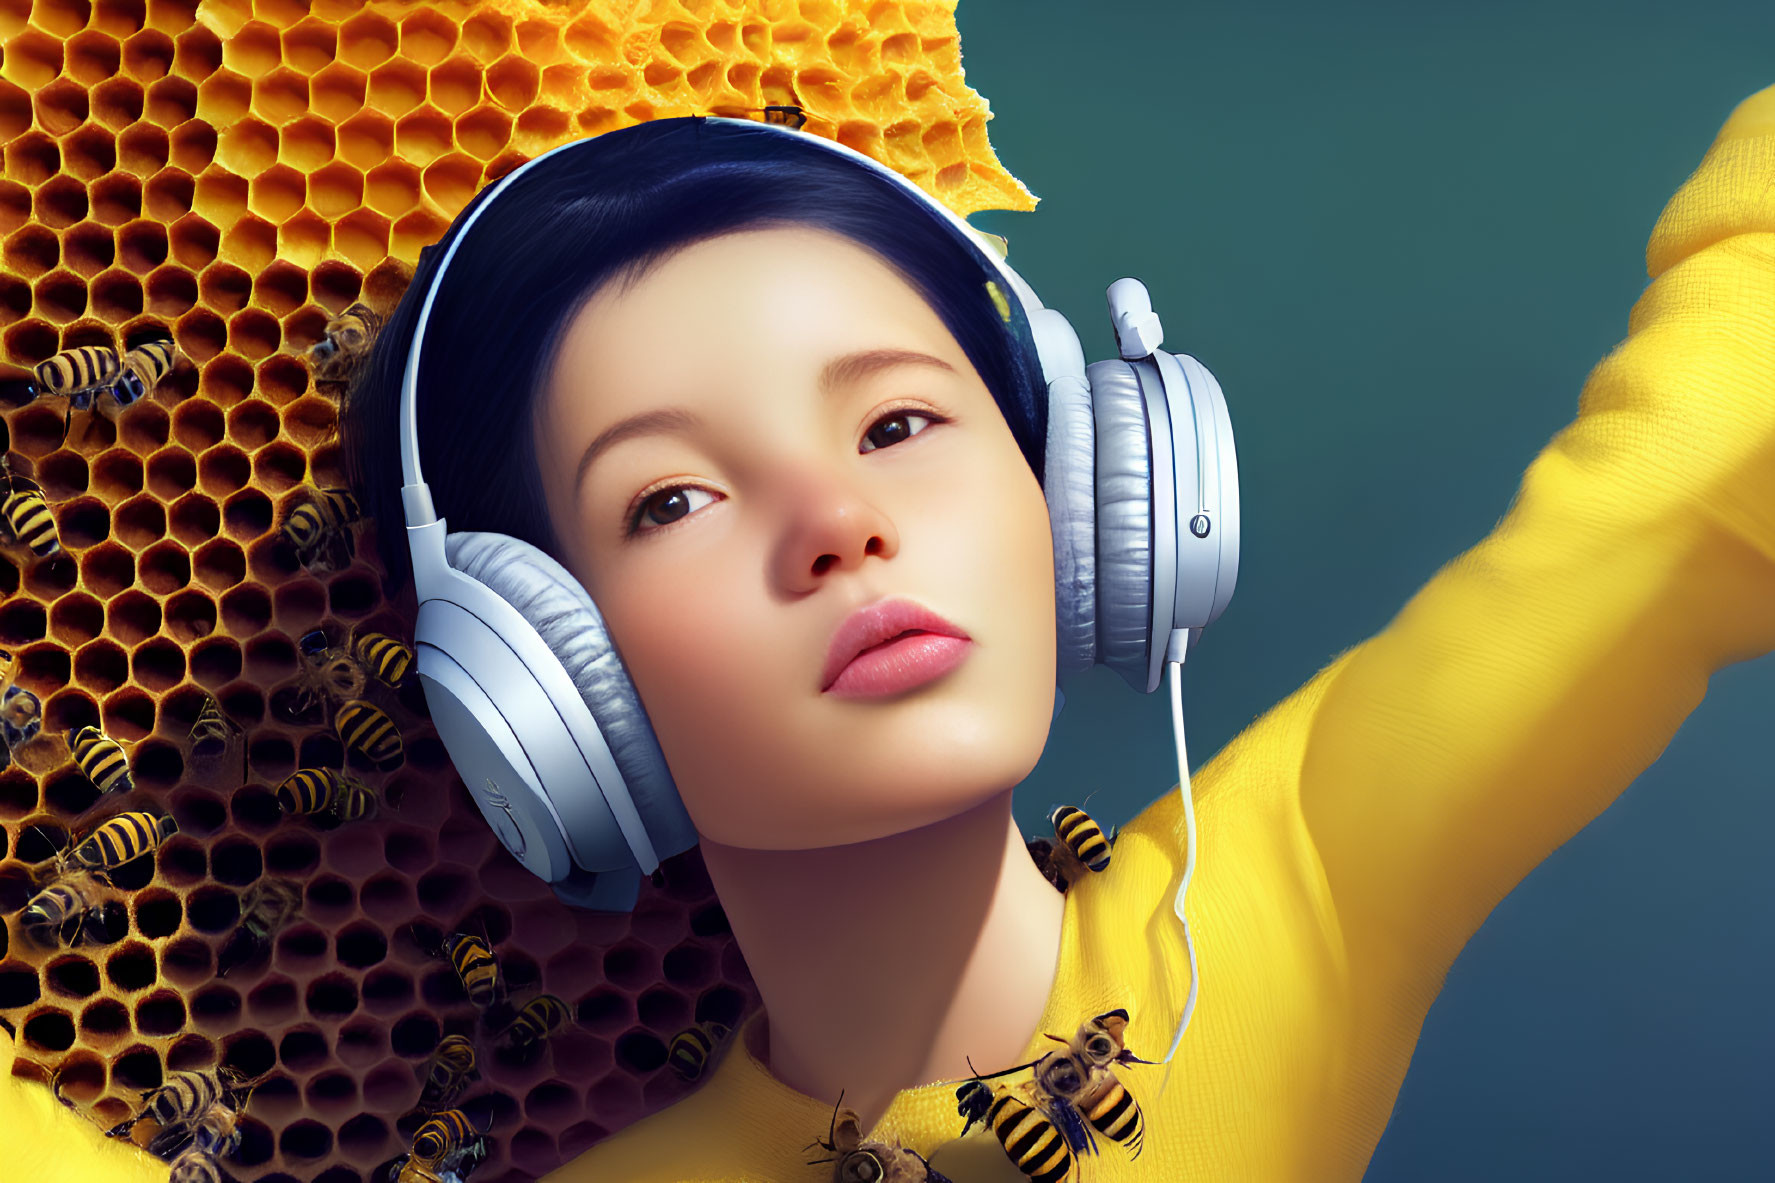 Person with headphones, bees, and honeycomb on teal background